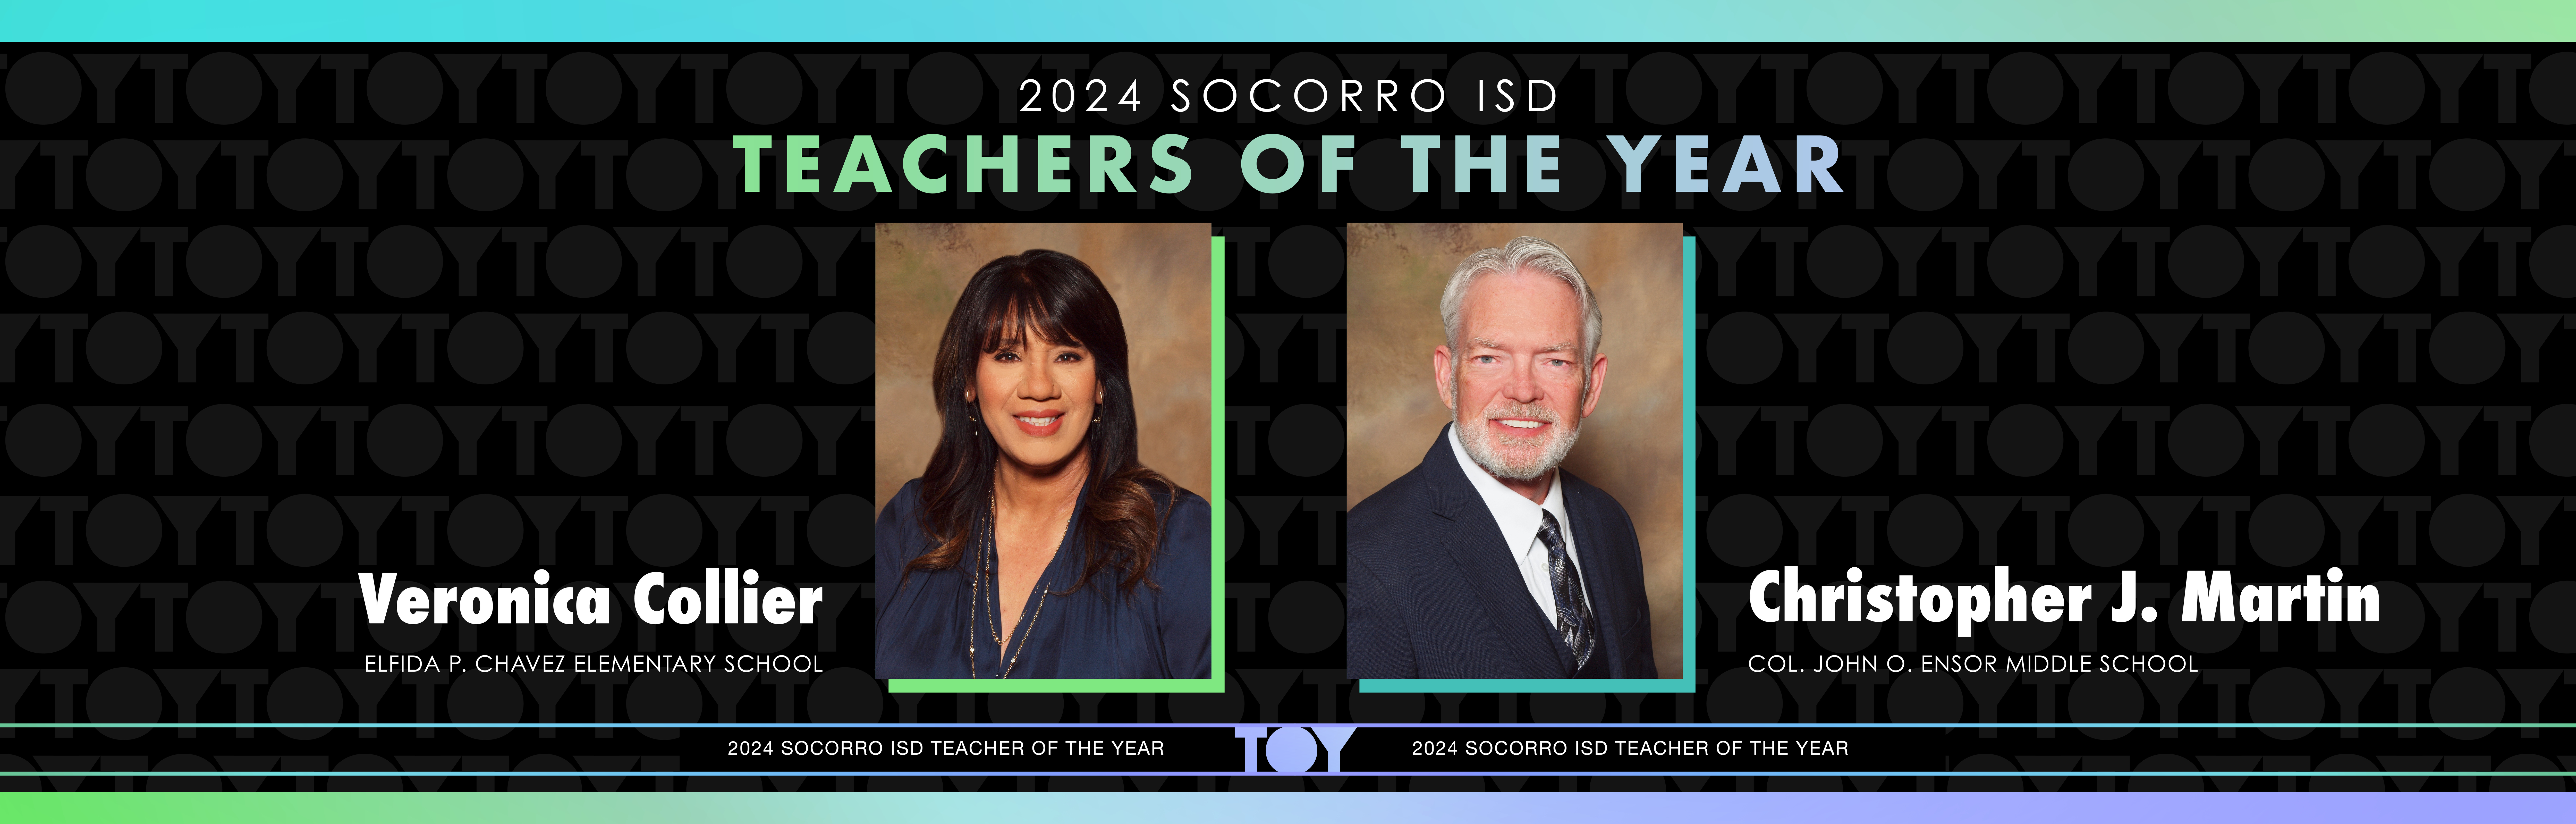 2024 Socorro ISD Teachers of the Year, Veronica Collier from Elfida Chavez Elementary and Christopher Martin from Col. John Ensor Middle School